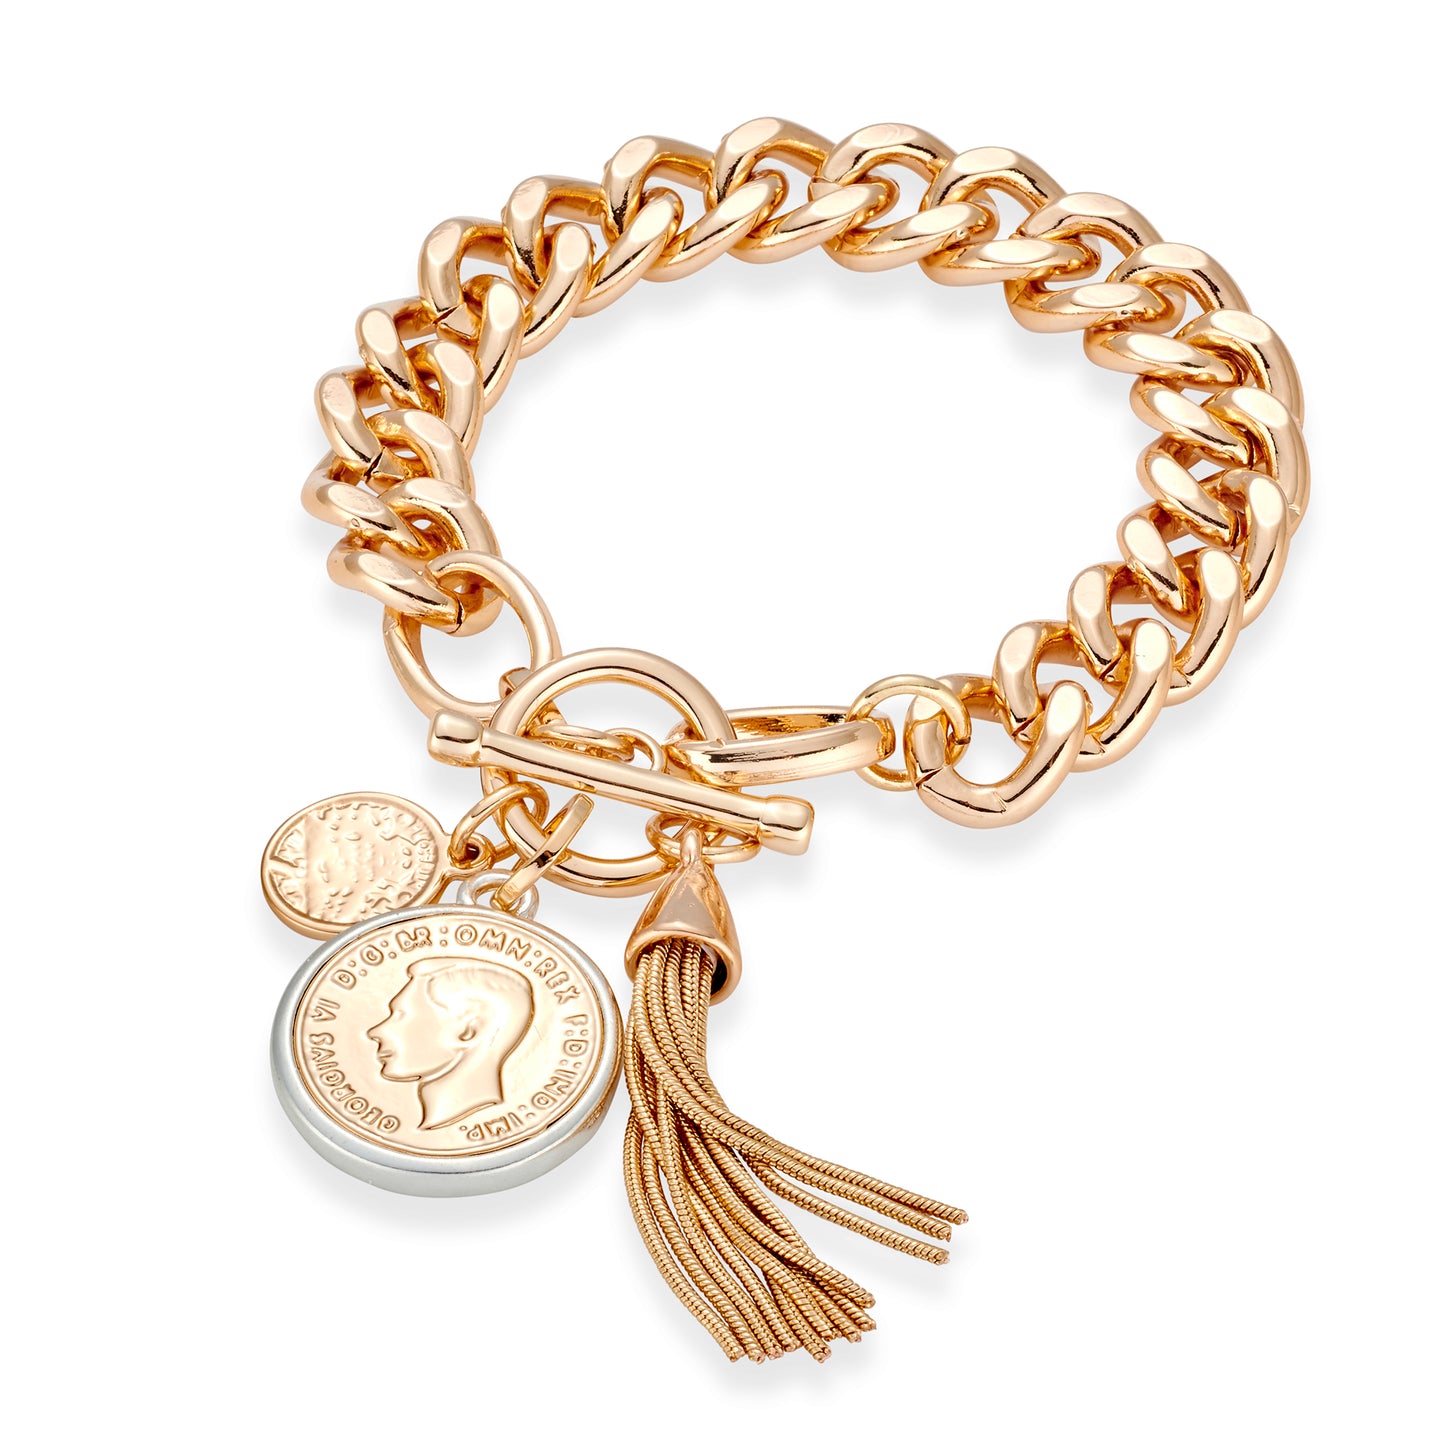 PAMELA gold curb link bracelet with two tone coin and tassel